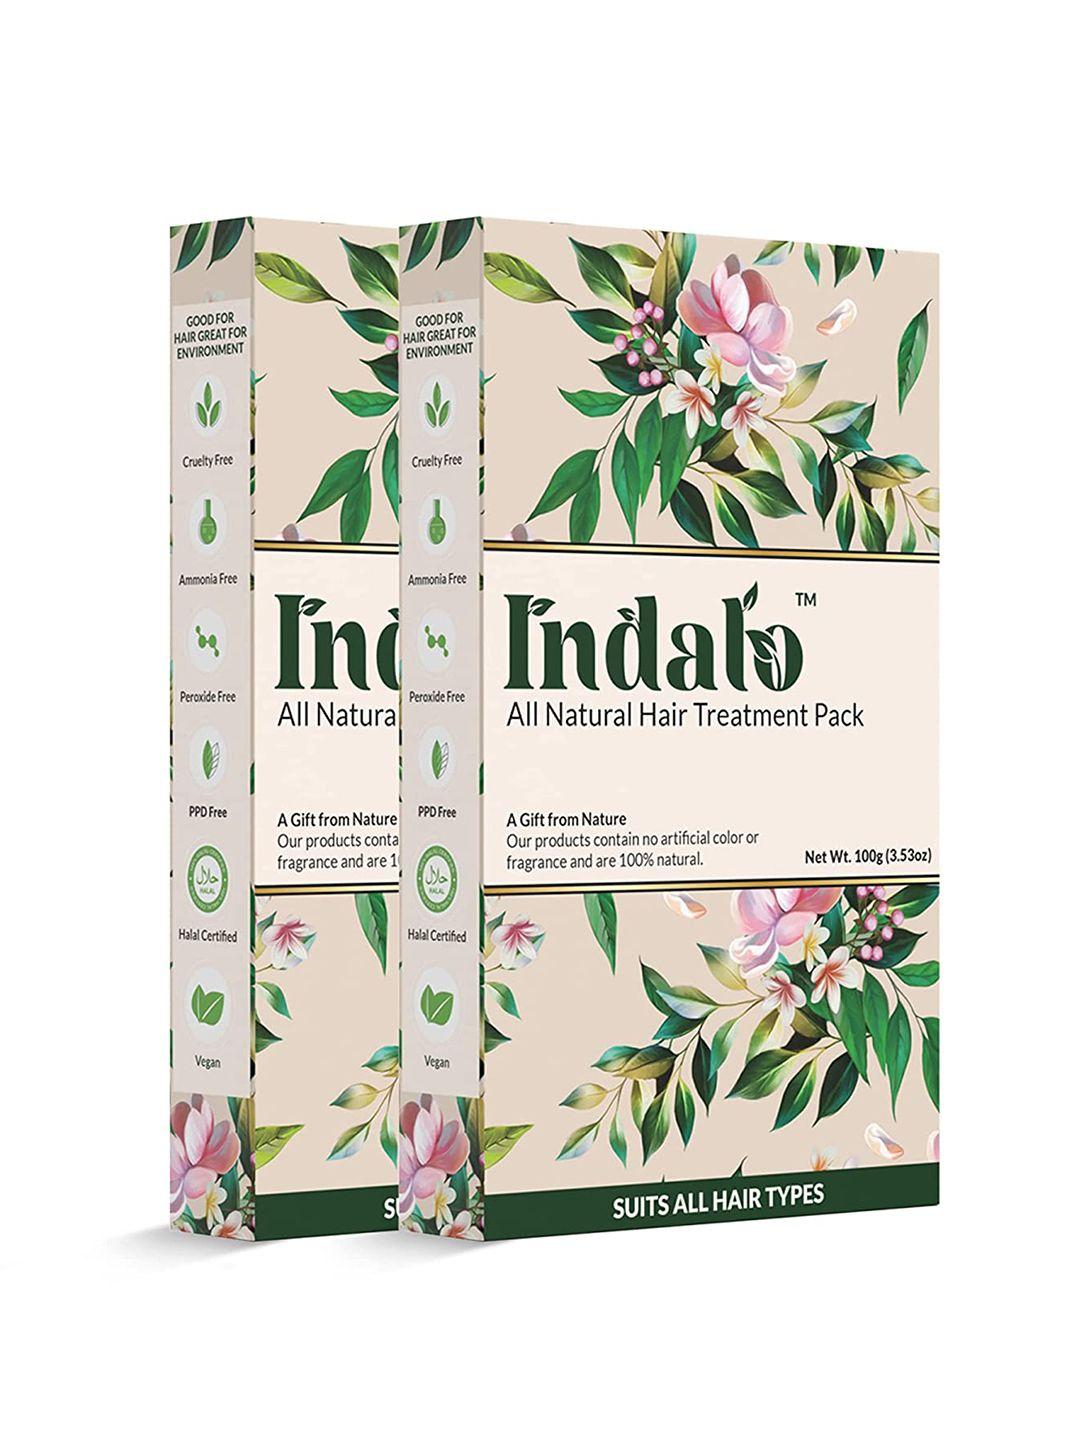 indalo set of 2 all-natural hair treatment pack for conditioning hair growth - 100g each